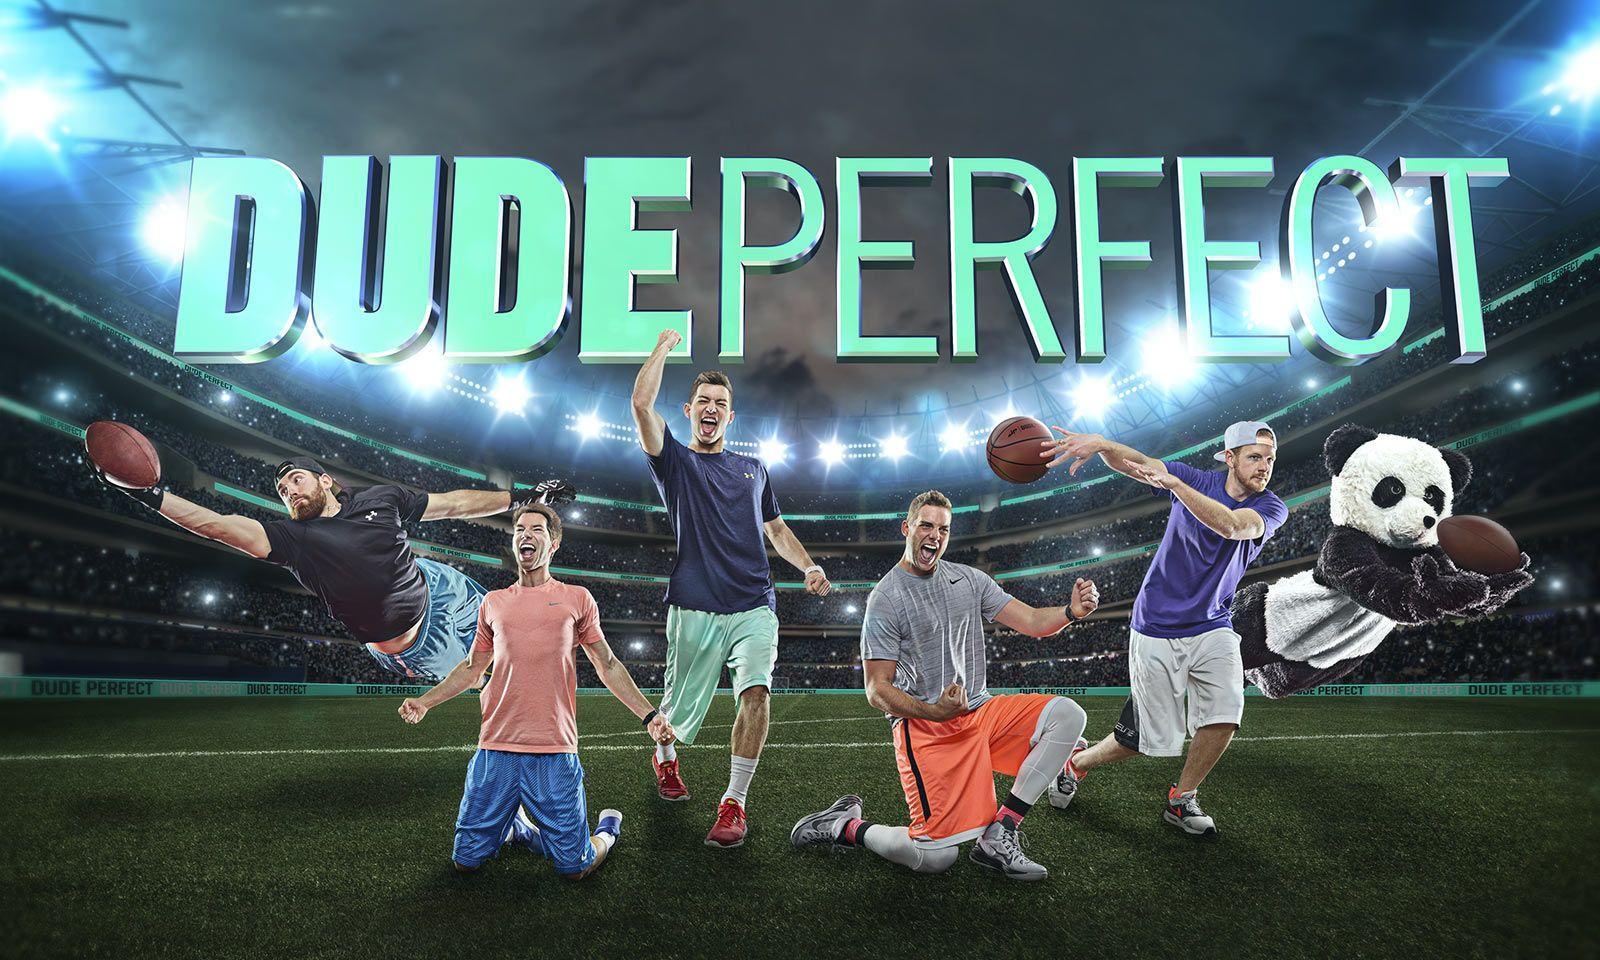 Dude Perfect Best Friends and a Panda